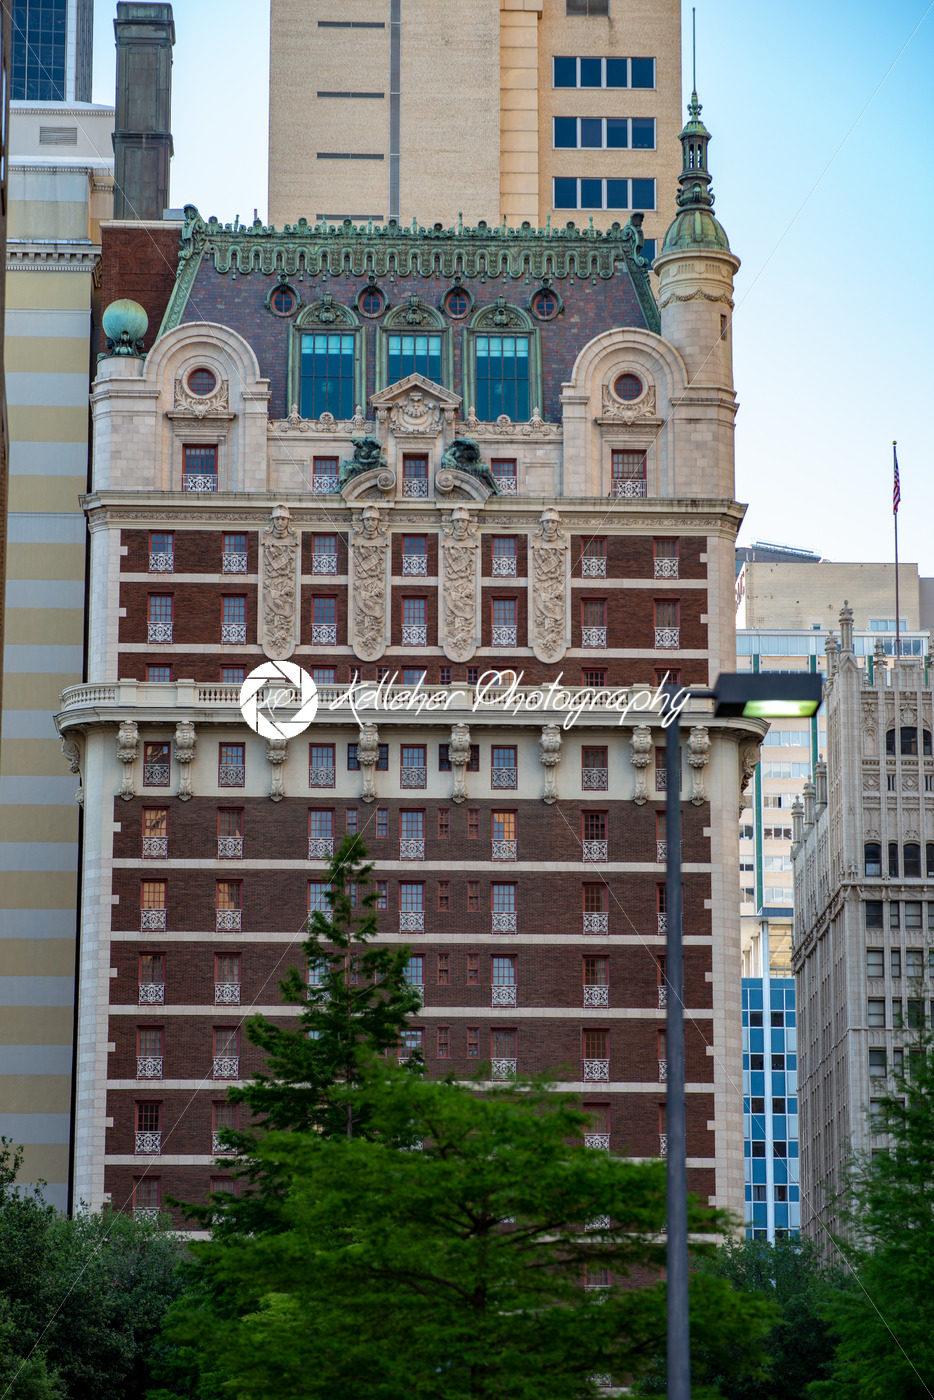 Dallas, Texas – May 7, 2018: The Adolphus Hotel - Kelleher Photography Store